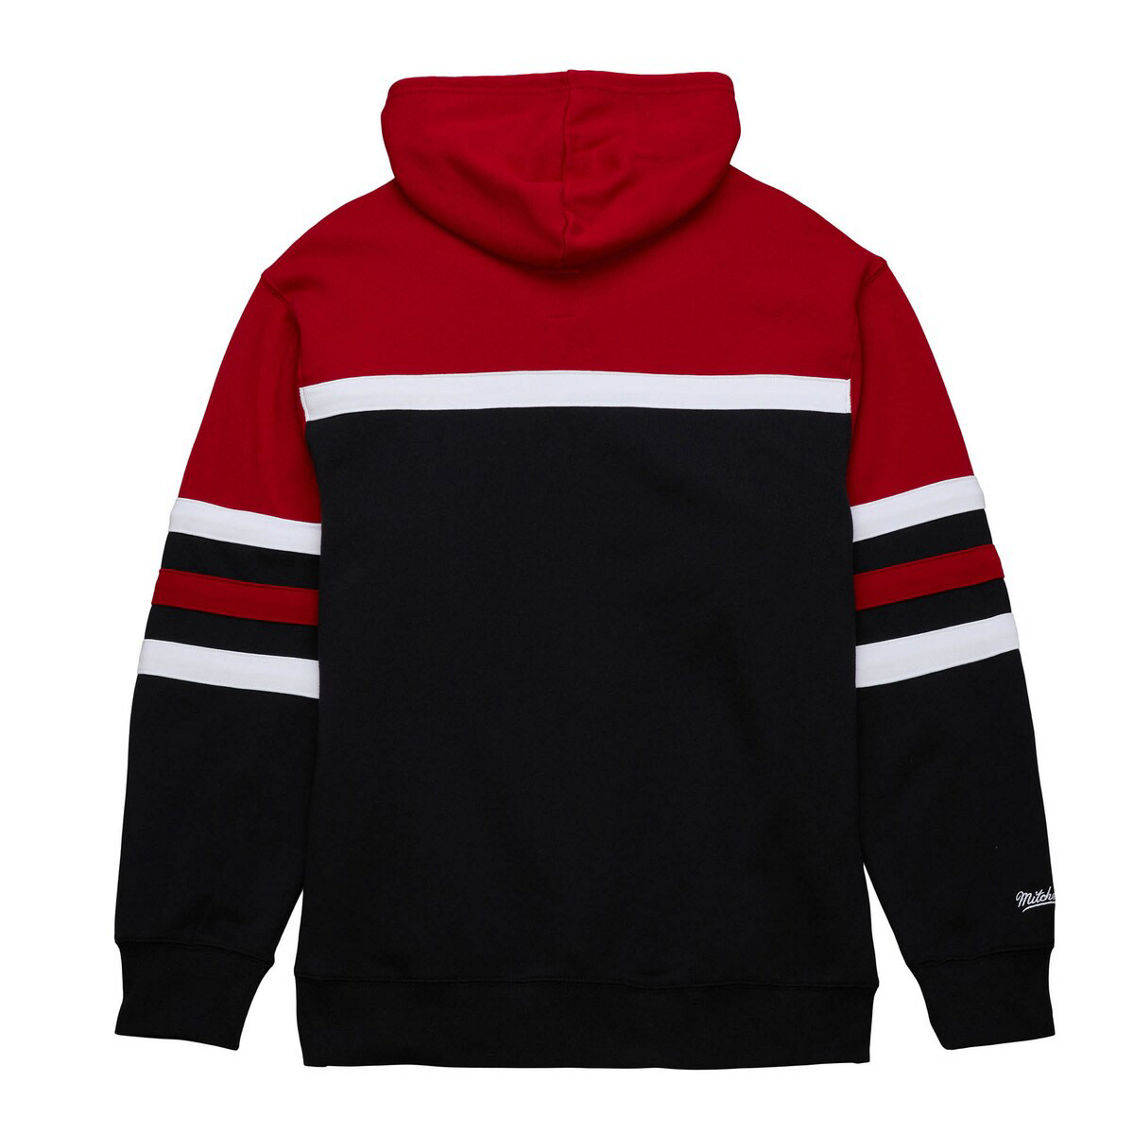 Mitchell & Ness Men's Black/Red Chicago Blackhawks Head Coach Pullover Hoodie - Image 4 of 4